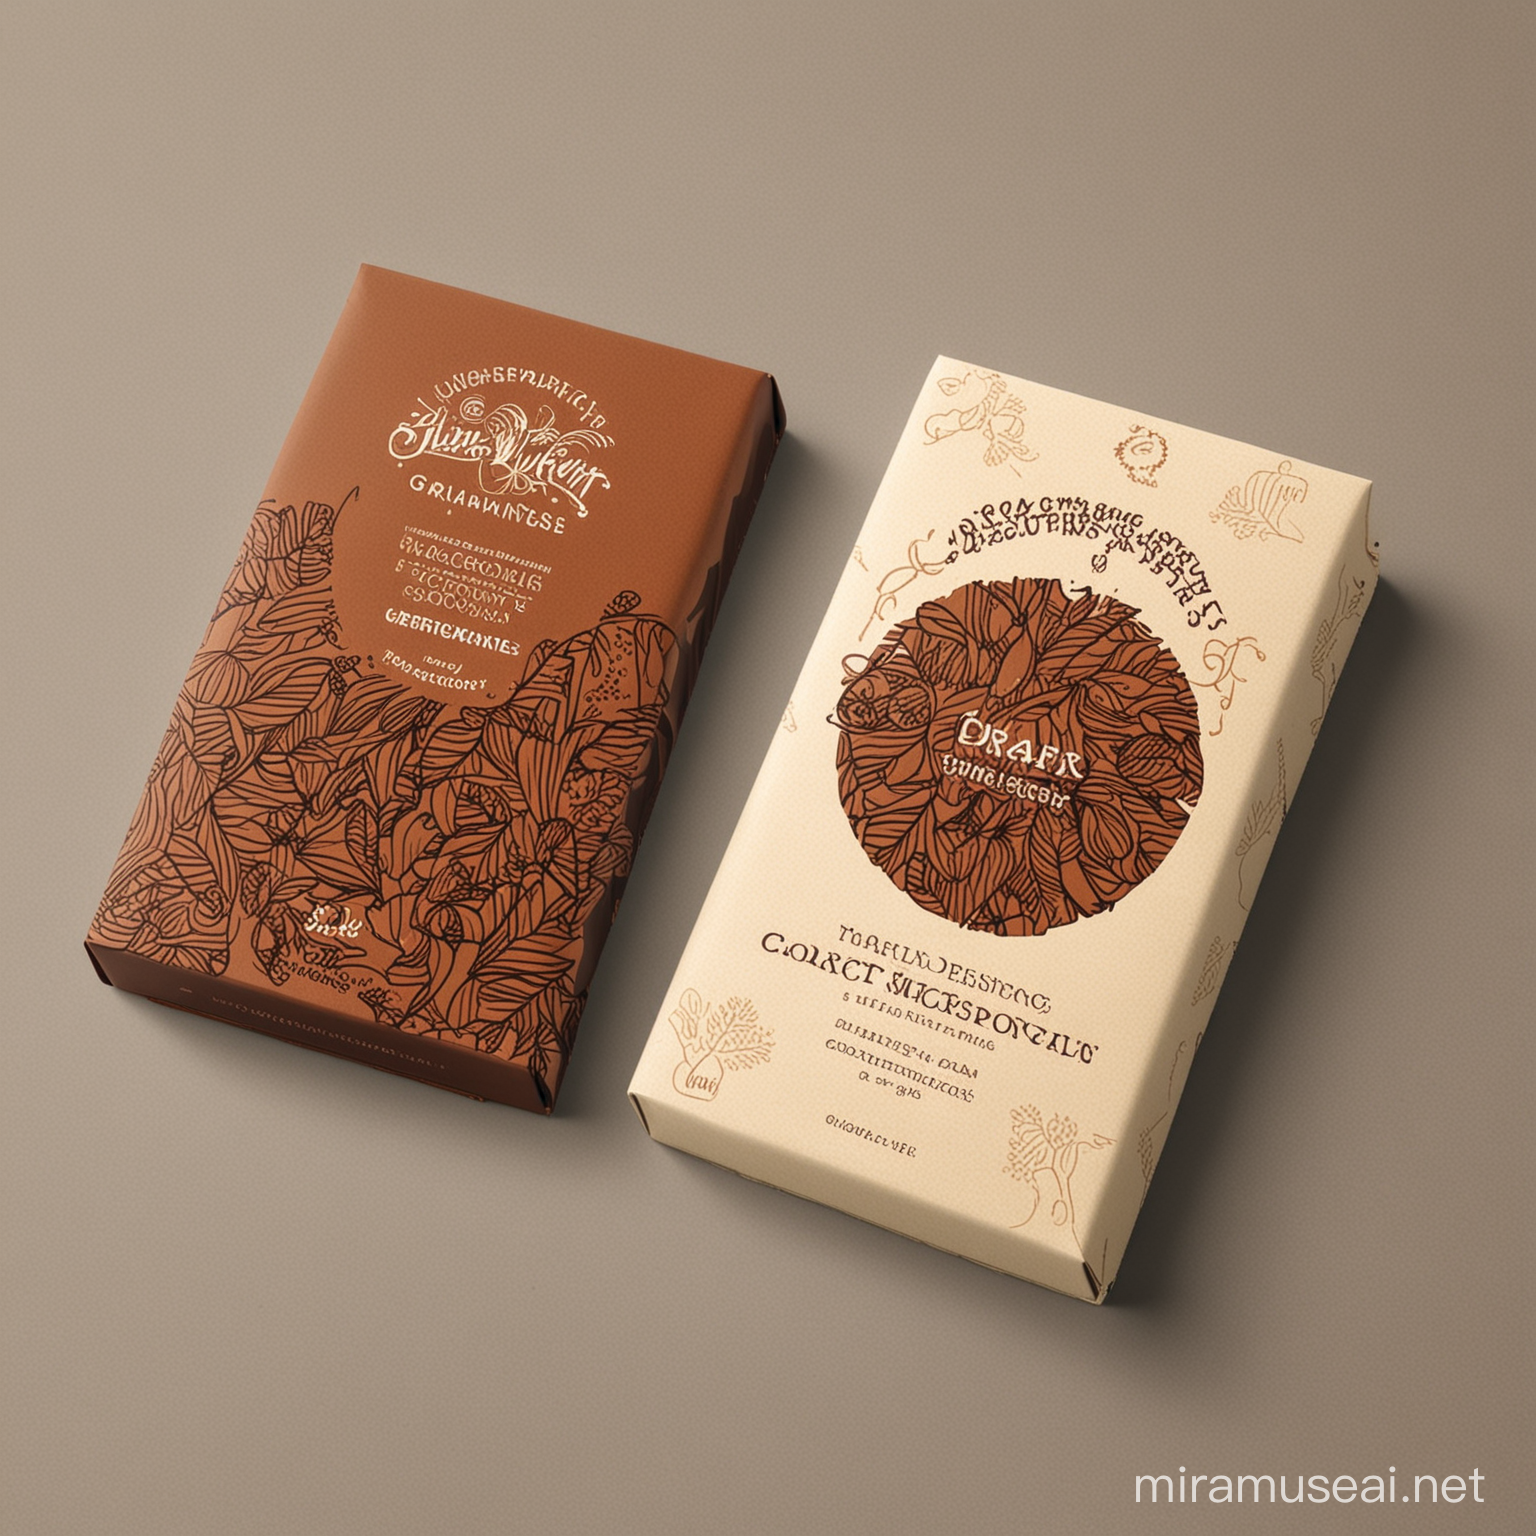 Artistic Organic Chocolate Packaging Design with Intricate Patterns and Earthy Tones